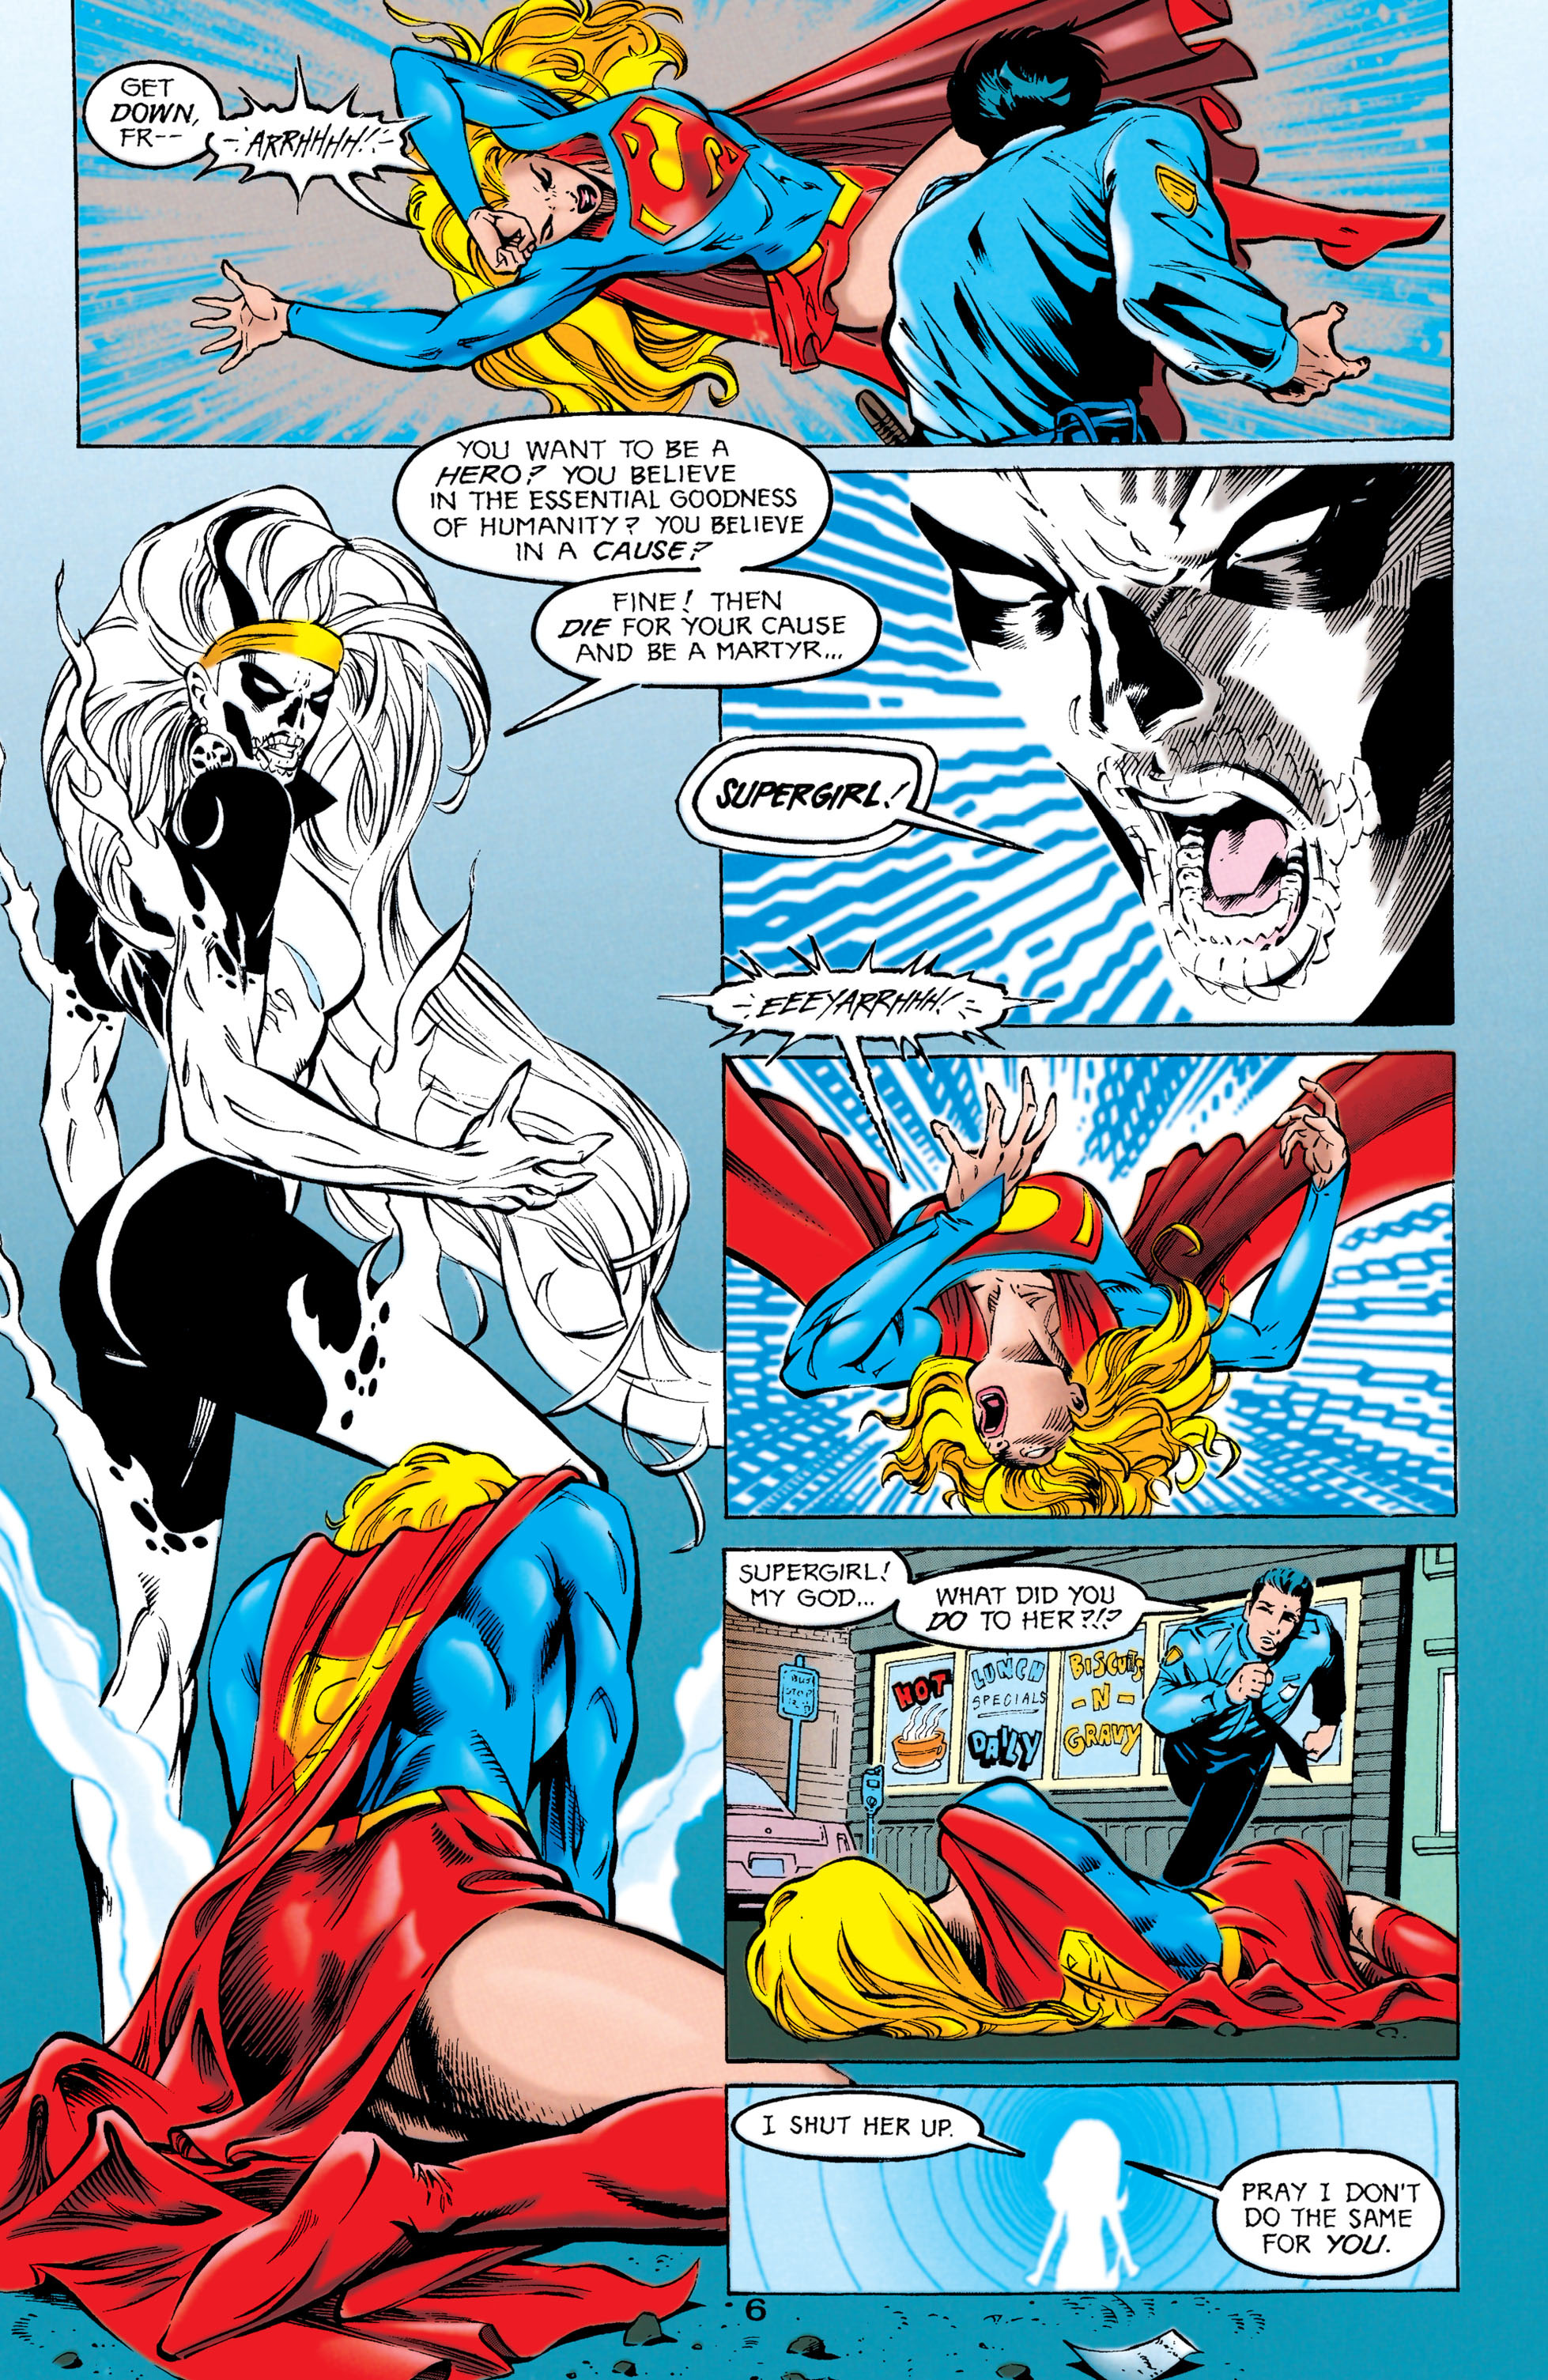 Supergirl (1996) 12 Page 6